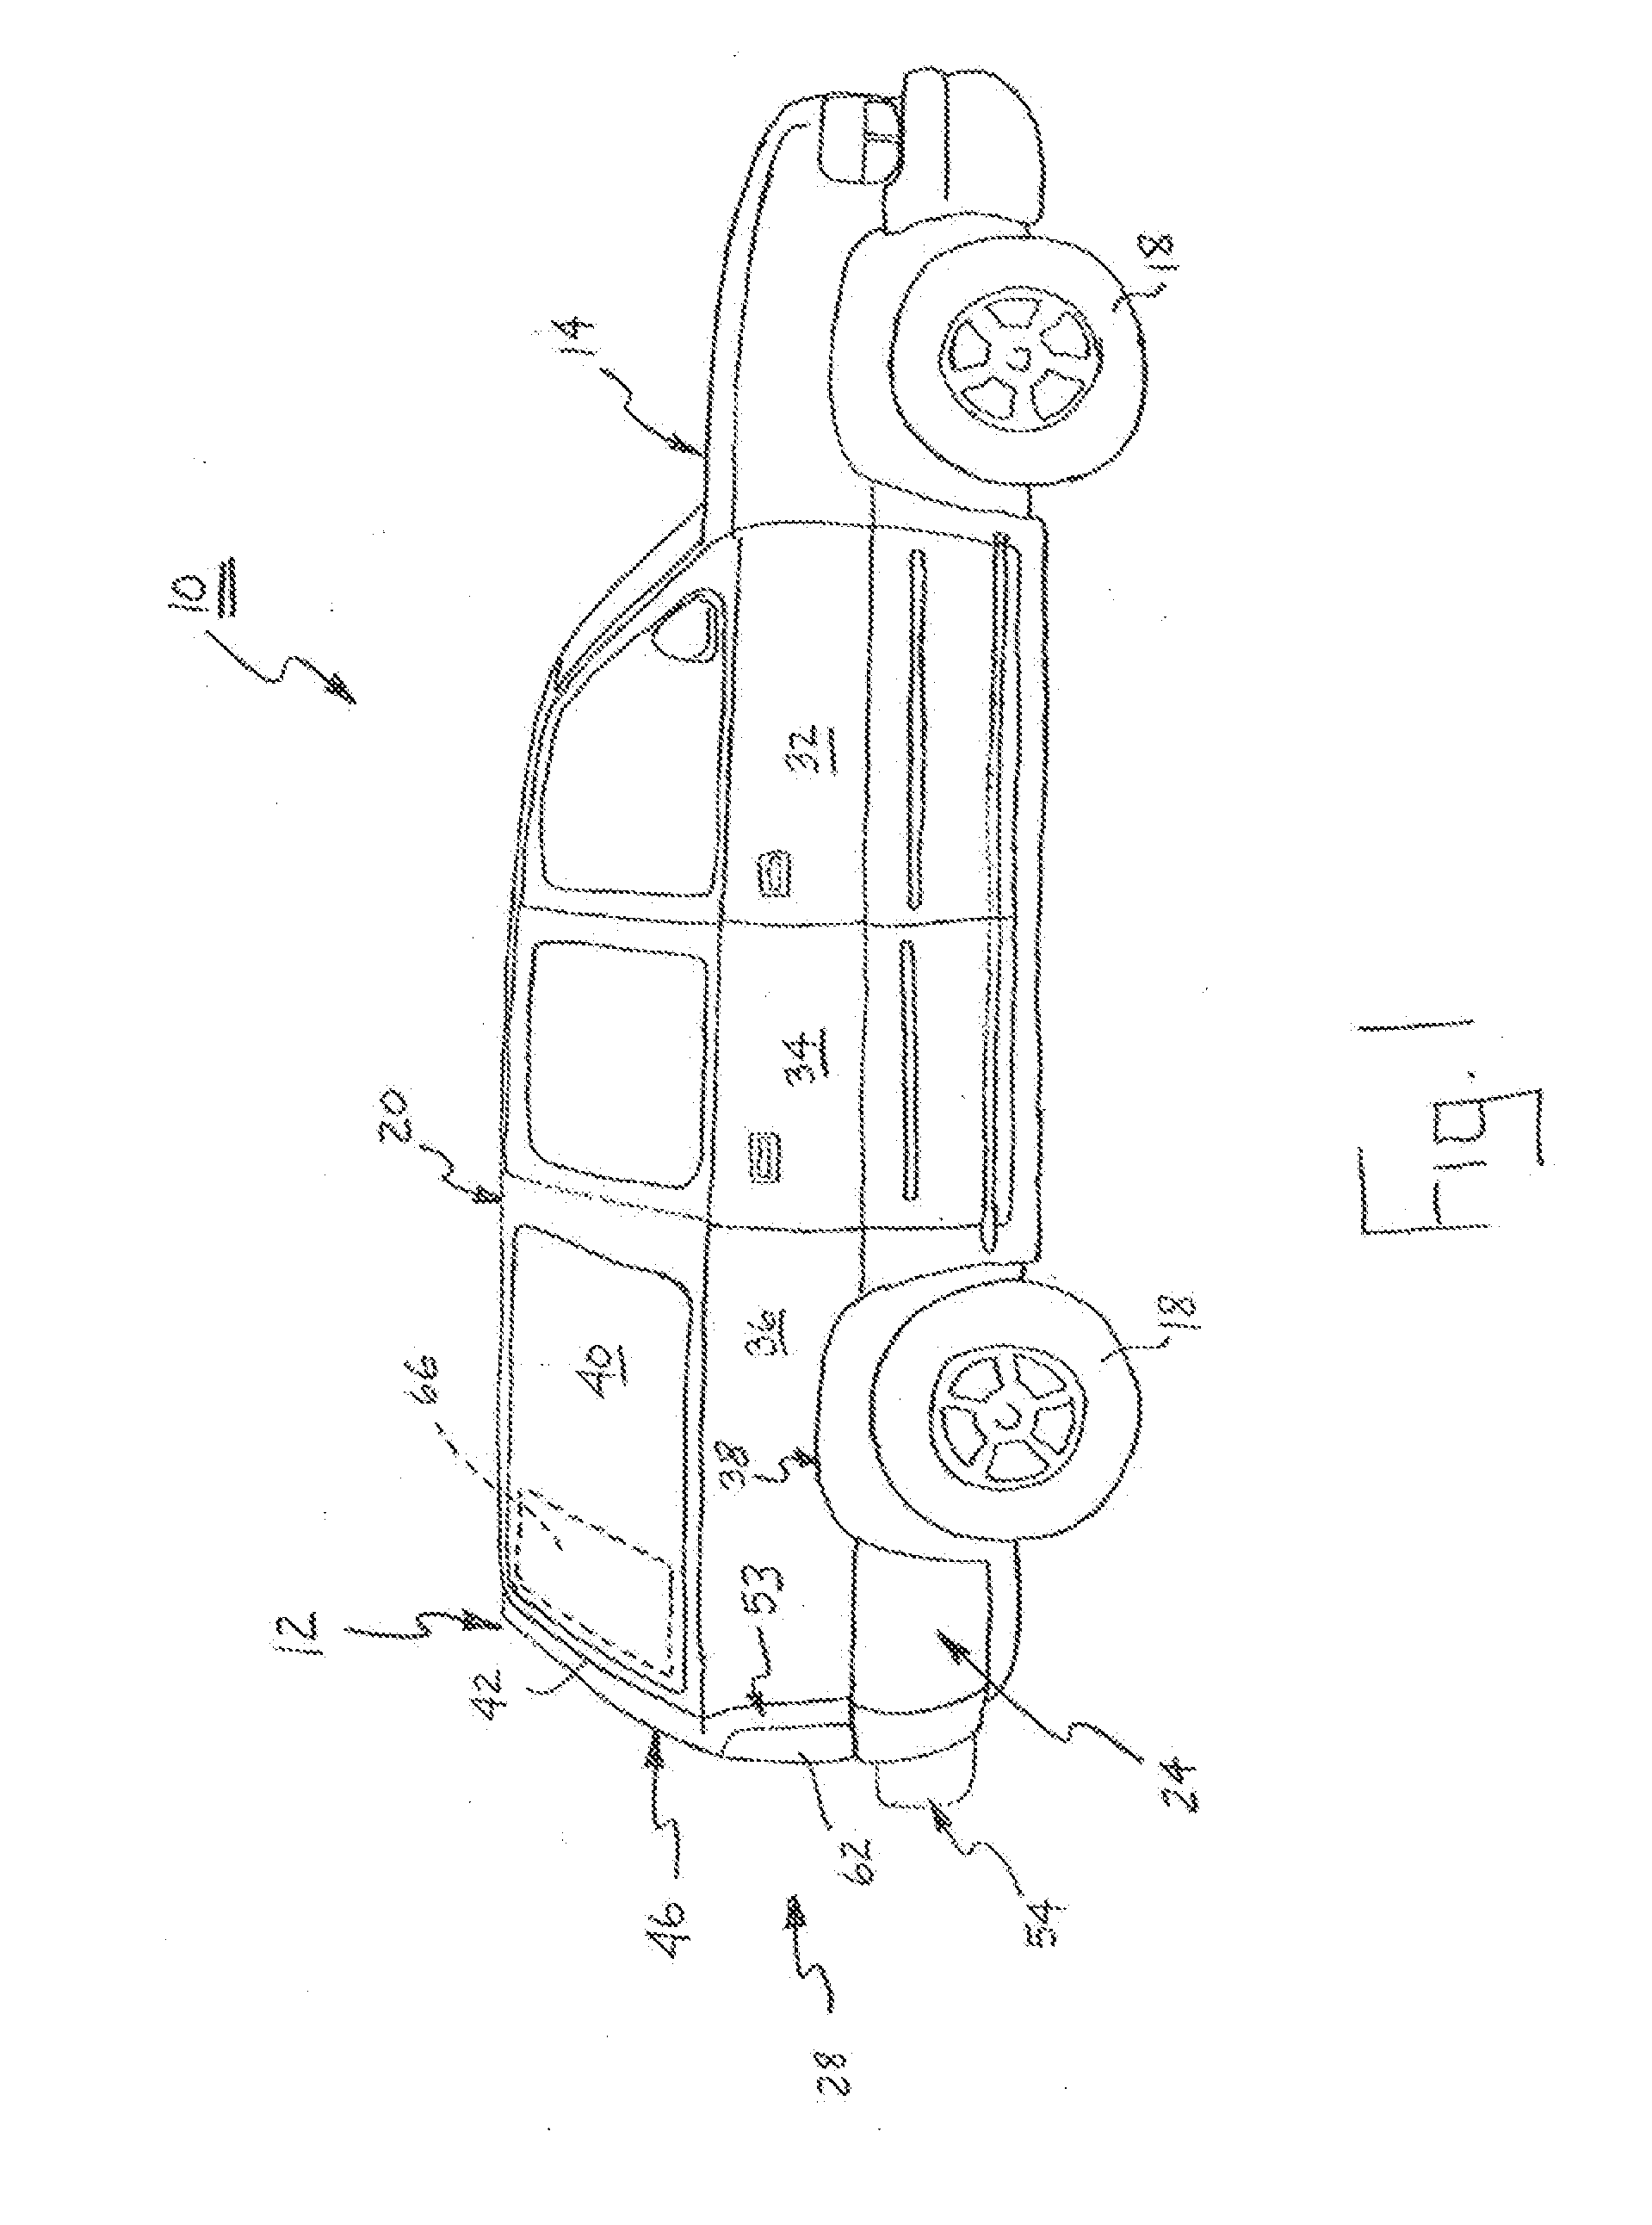 Apparatus for configuring the interior space of a vehicle